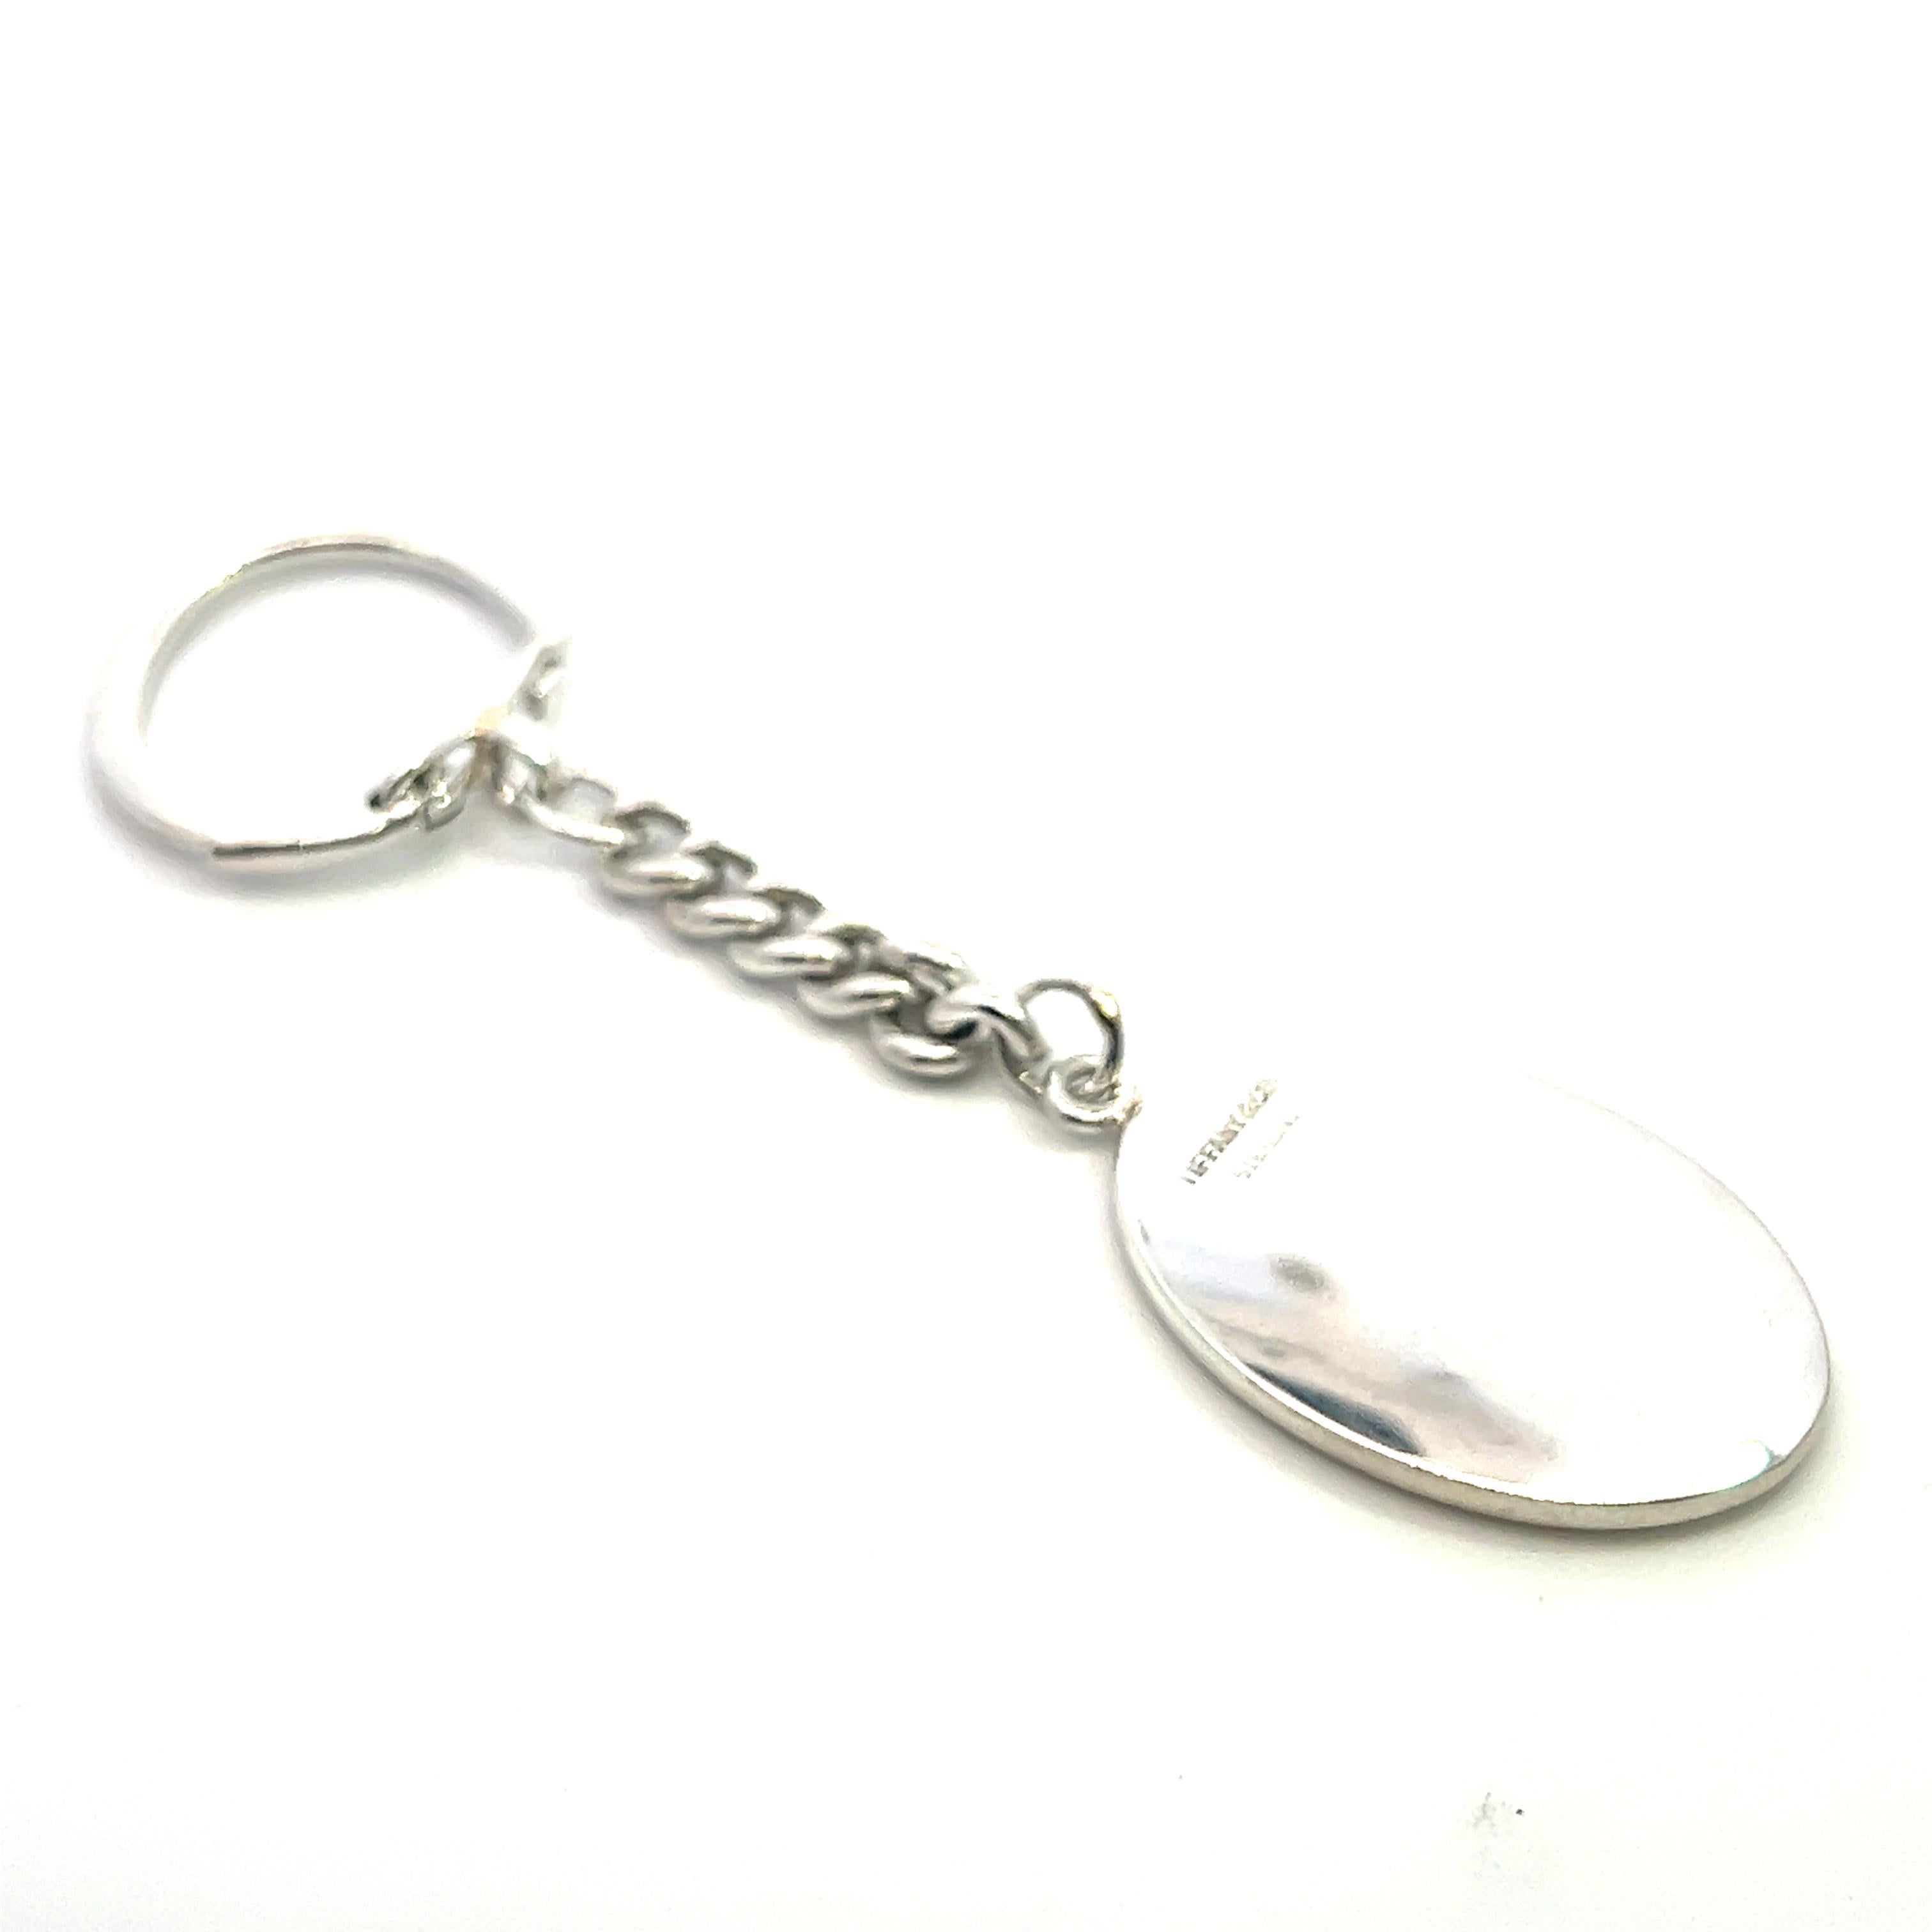 Tiffany & Co Estate Keychain Sterling Silver TIF643

TRUSTED SELLER SINCE 2002

PLEASE SEE OUR HUNDREDS OF POSITIVE FEEDBACKS FROM OUR CLIENTS!!

FREE SHIPPING

DETAILS
Metal: Sterling Silver

This Authentic Tiffany & Co. Keychain is in wonderful